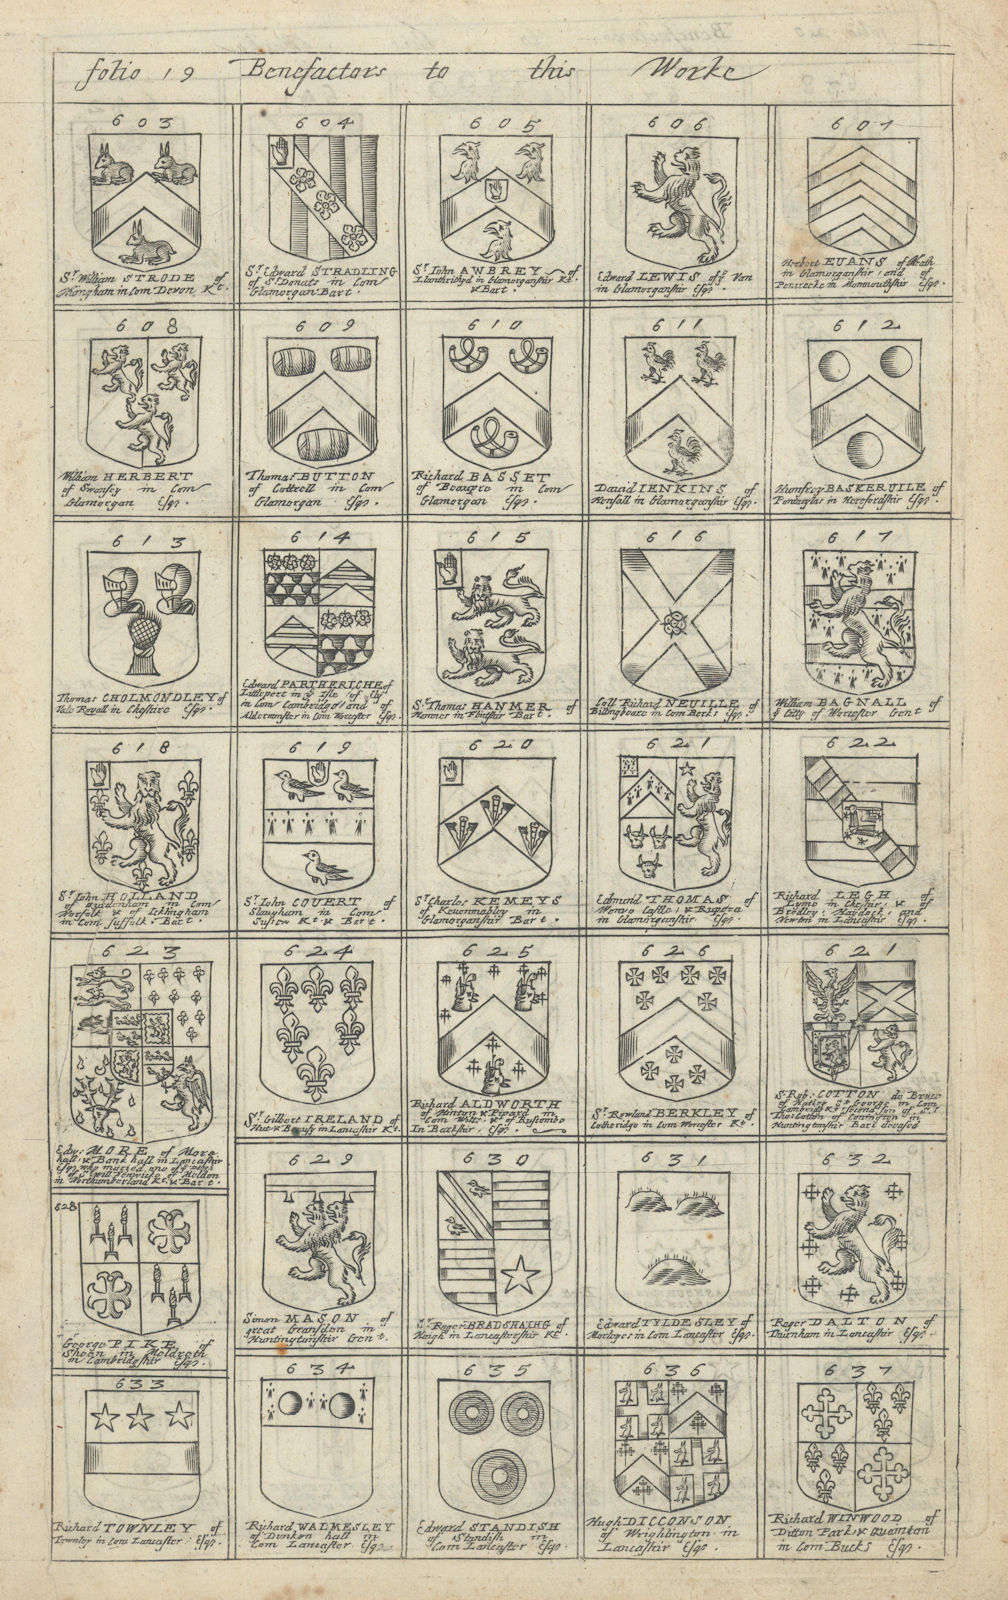 Associate Product Family coats of arms of benefactors to Blome's Britannia. Folio 19 #603-637 1673